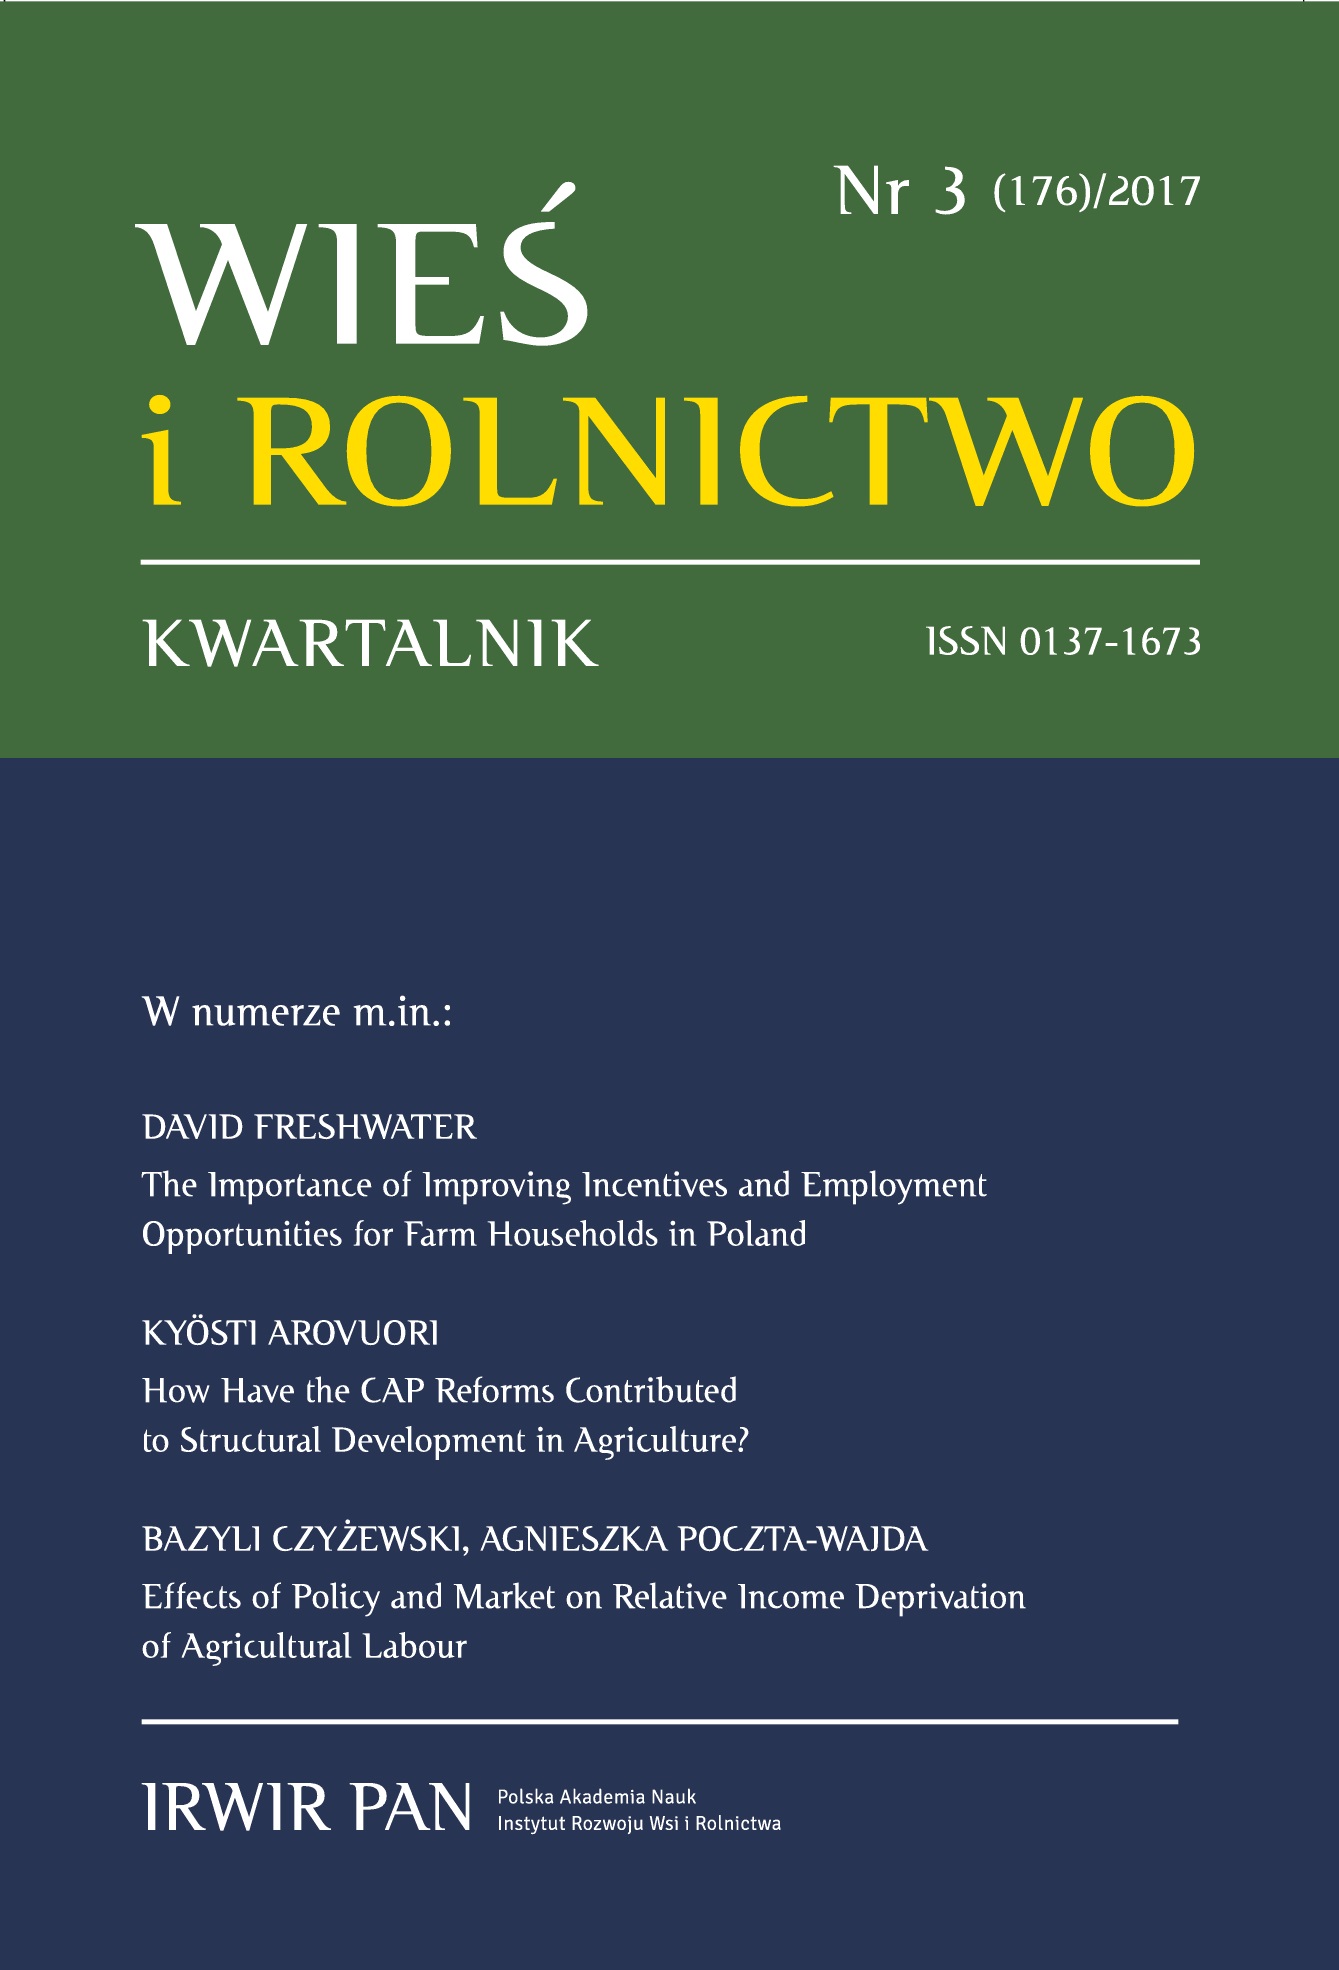 The Importance of Improving Incentives and Employment Opportunities for Farm Households in Poland